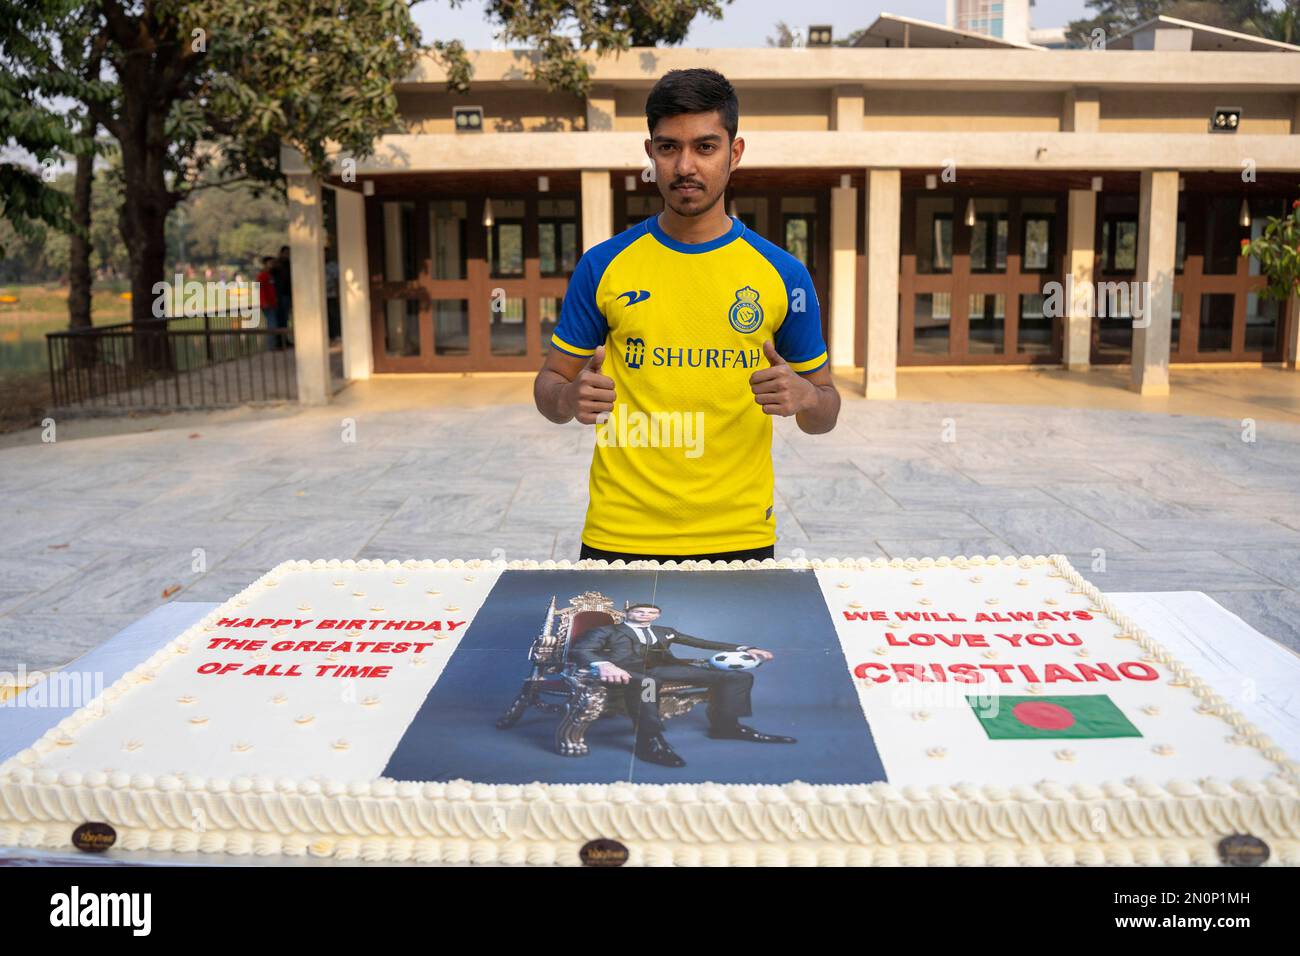 Dhaka, Bangladesh. 05th Feb, 2023. A fan wearing Al Nassr jersey poses with the cake.The fans of Cristiano Ronaldo celebrate its 38th birthday by cutting a 38kg cake in Ramna Park. The football superstar has a large follower base in Bangladesh. (Photo by Rizwan Hasan/Pacific Press) Credit: Pacific Press Media Production Corp./Alamy Live News Stock Photo